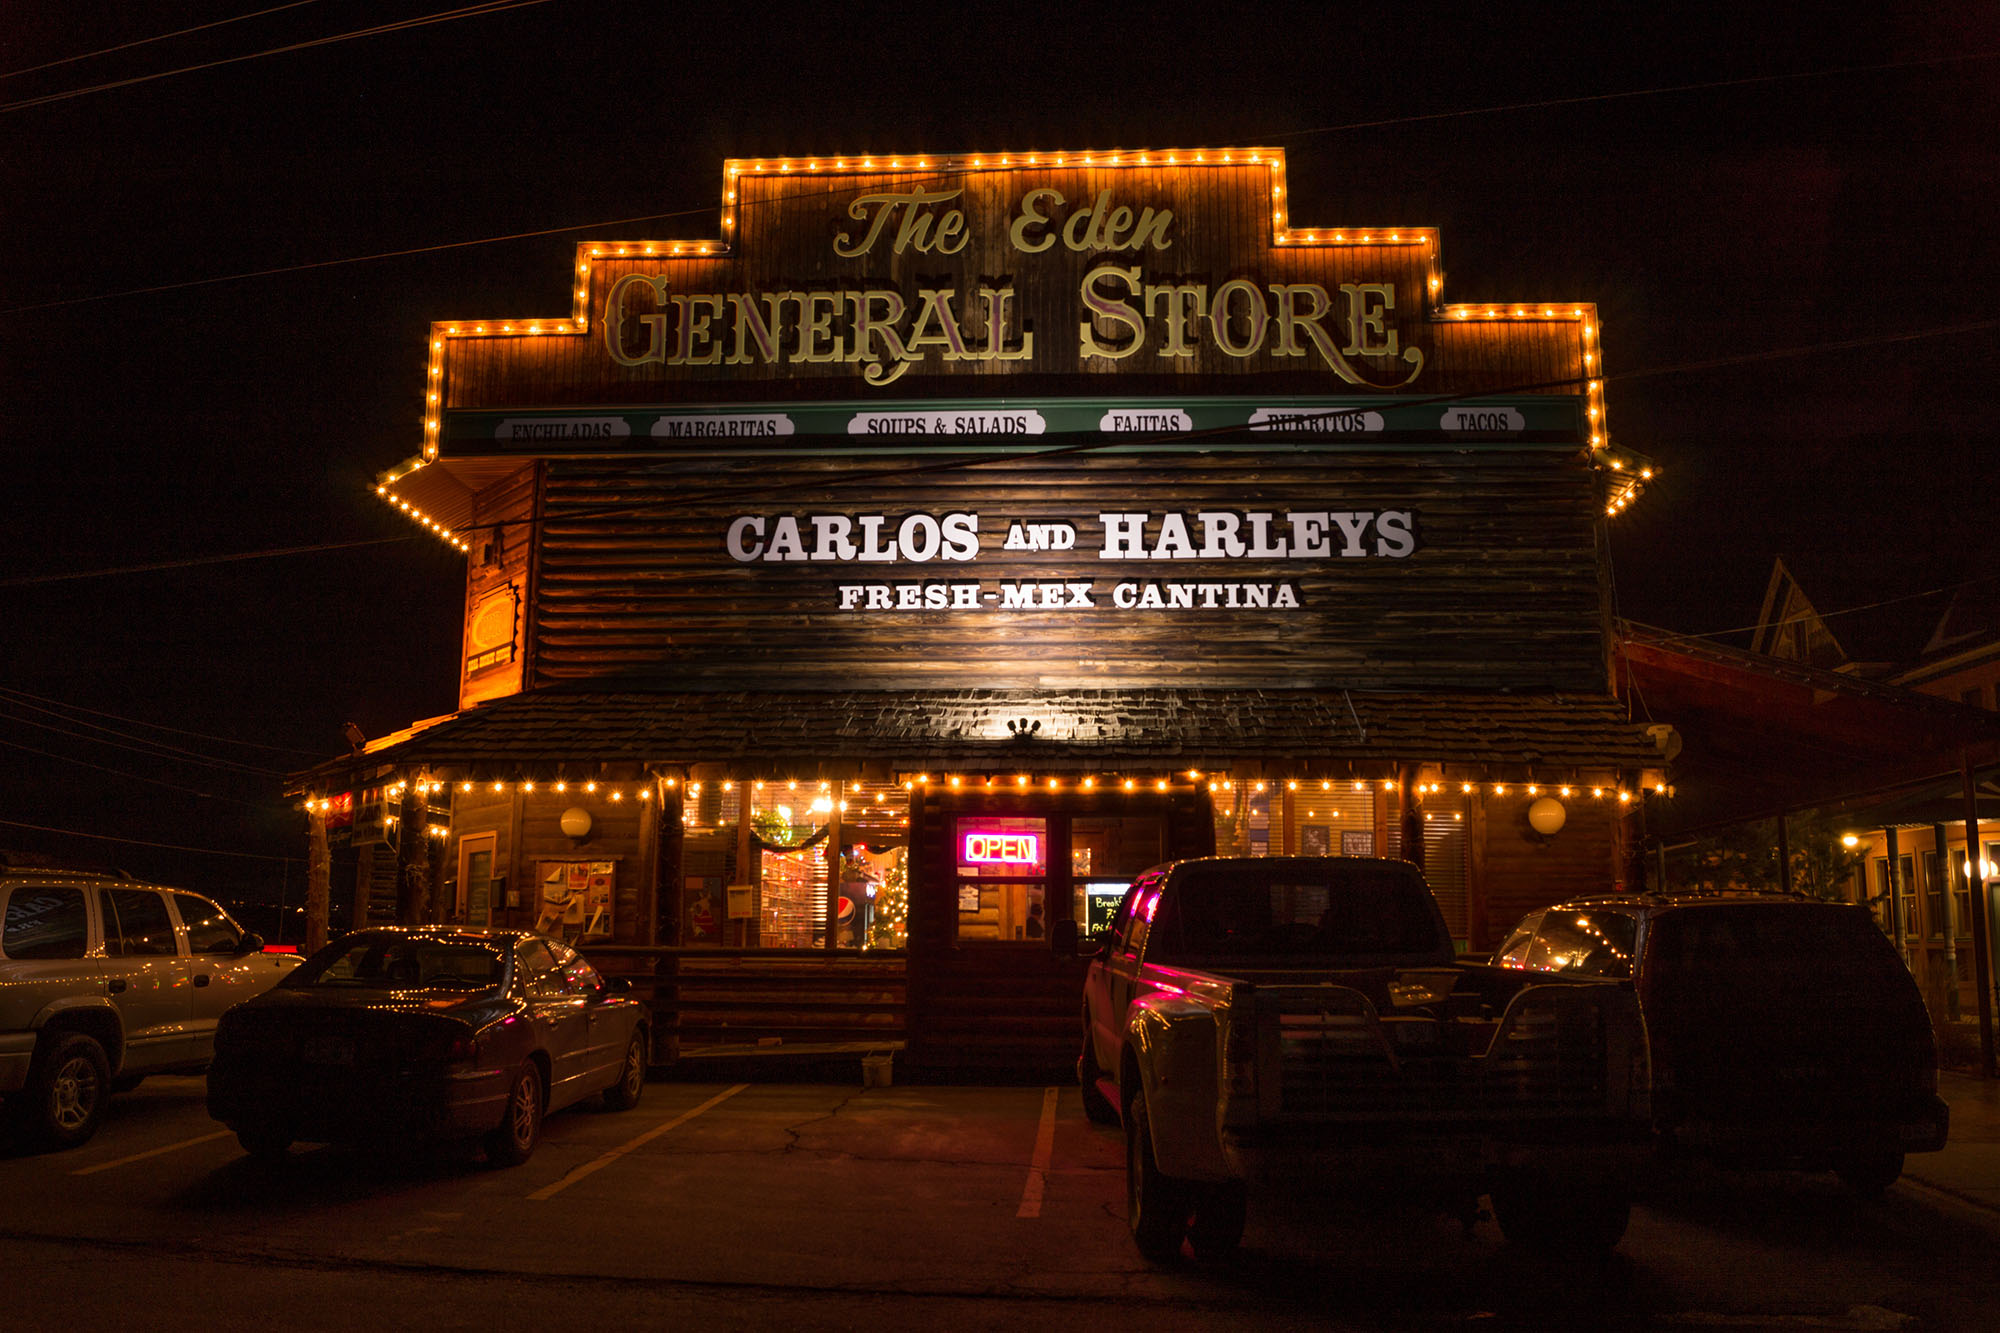 Carlos and Harleys restaurant at night with a glowing open sign.